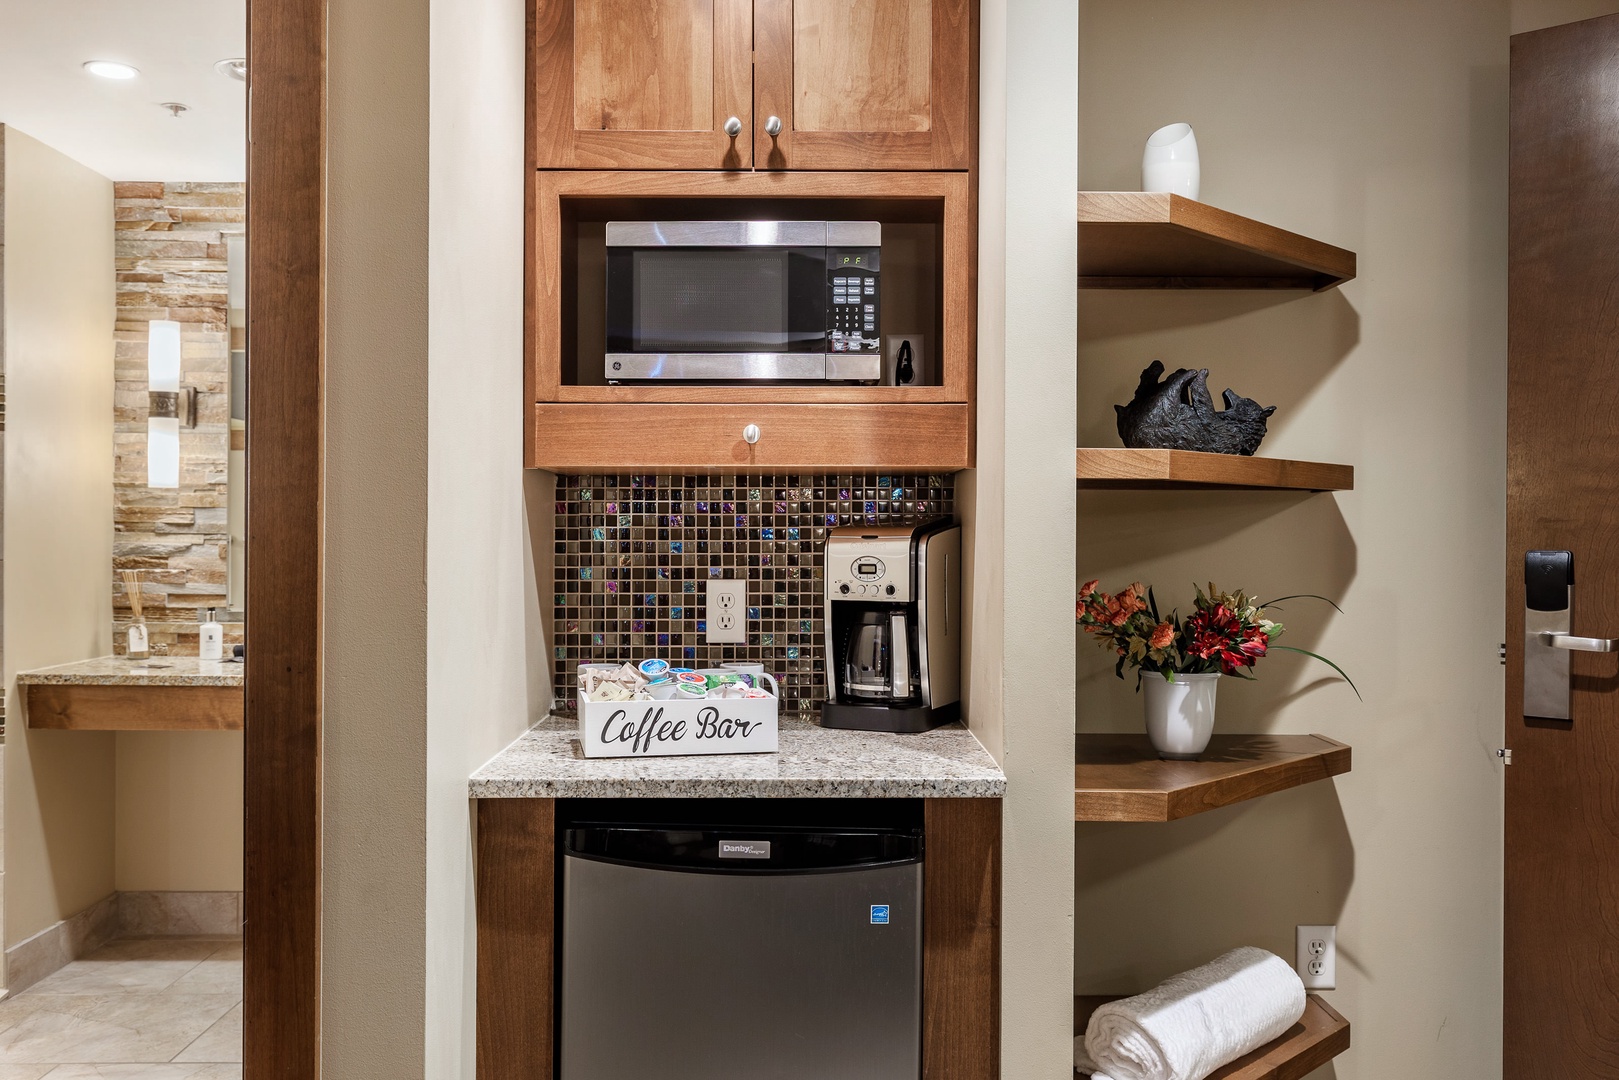 Kitchenette with coffee maker, microwave and fridge